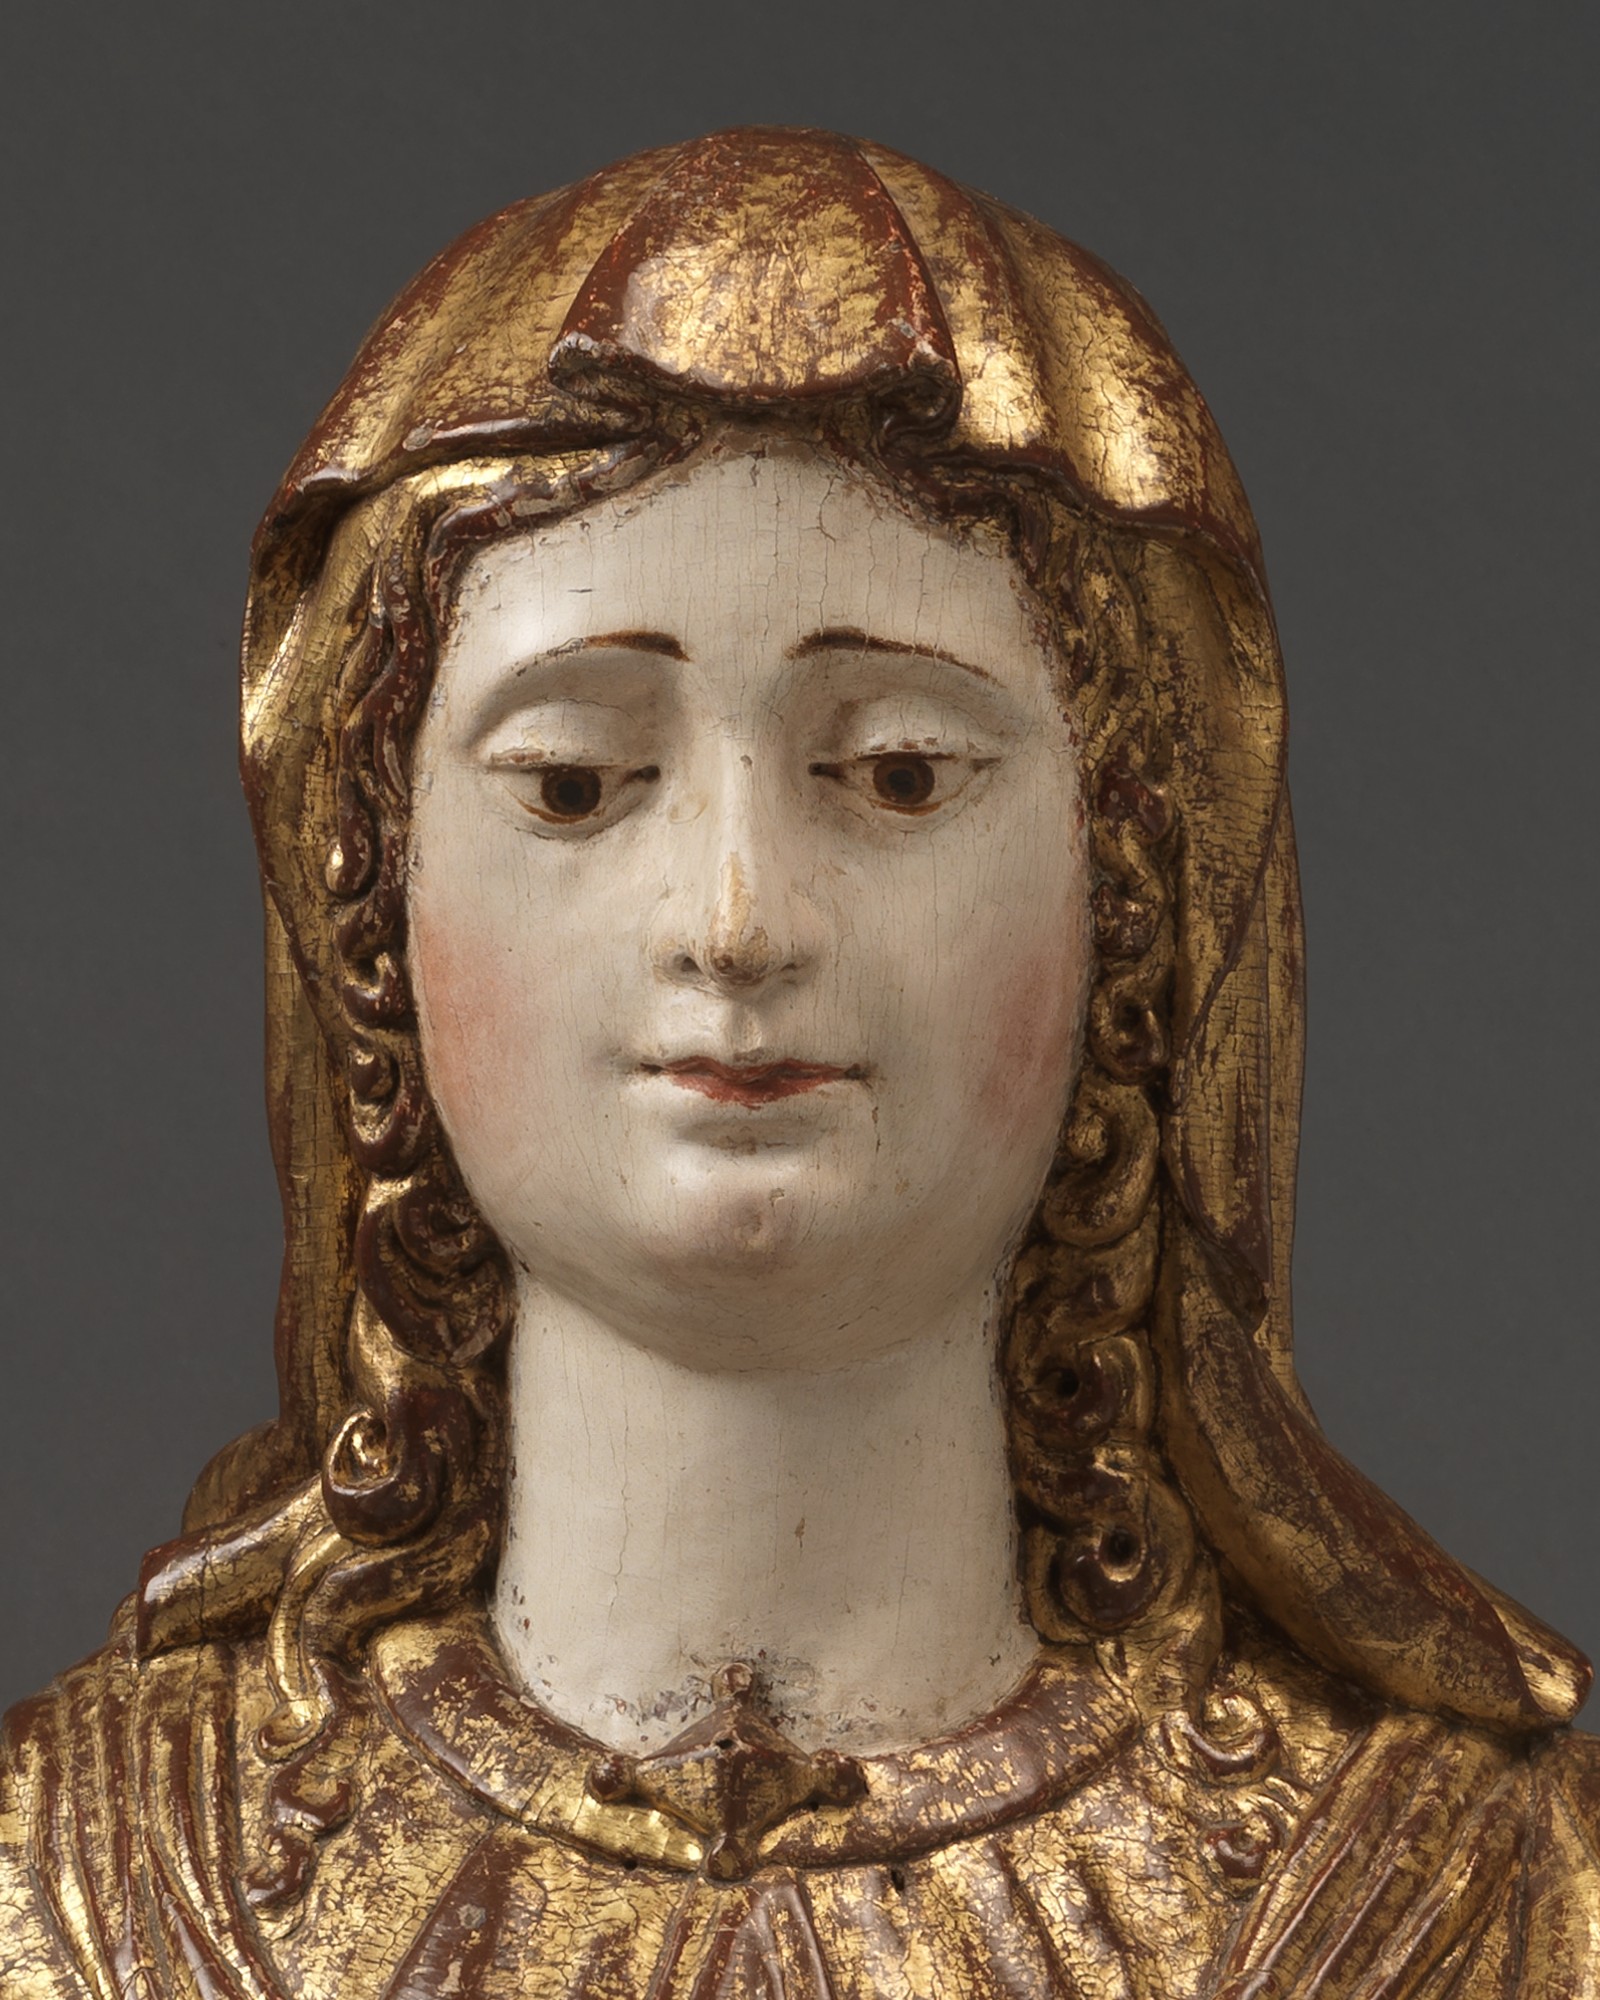 A Reliquary BustFemale Saint, Spain, Seville, first half 16th century